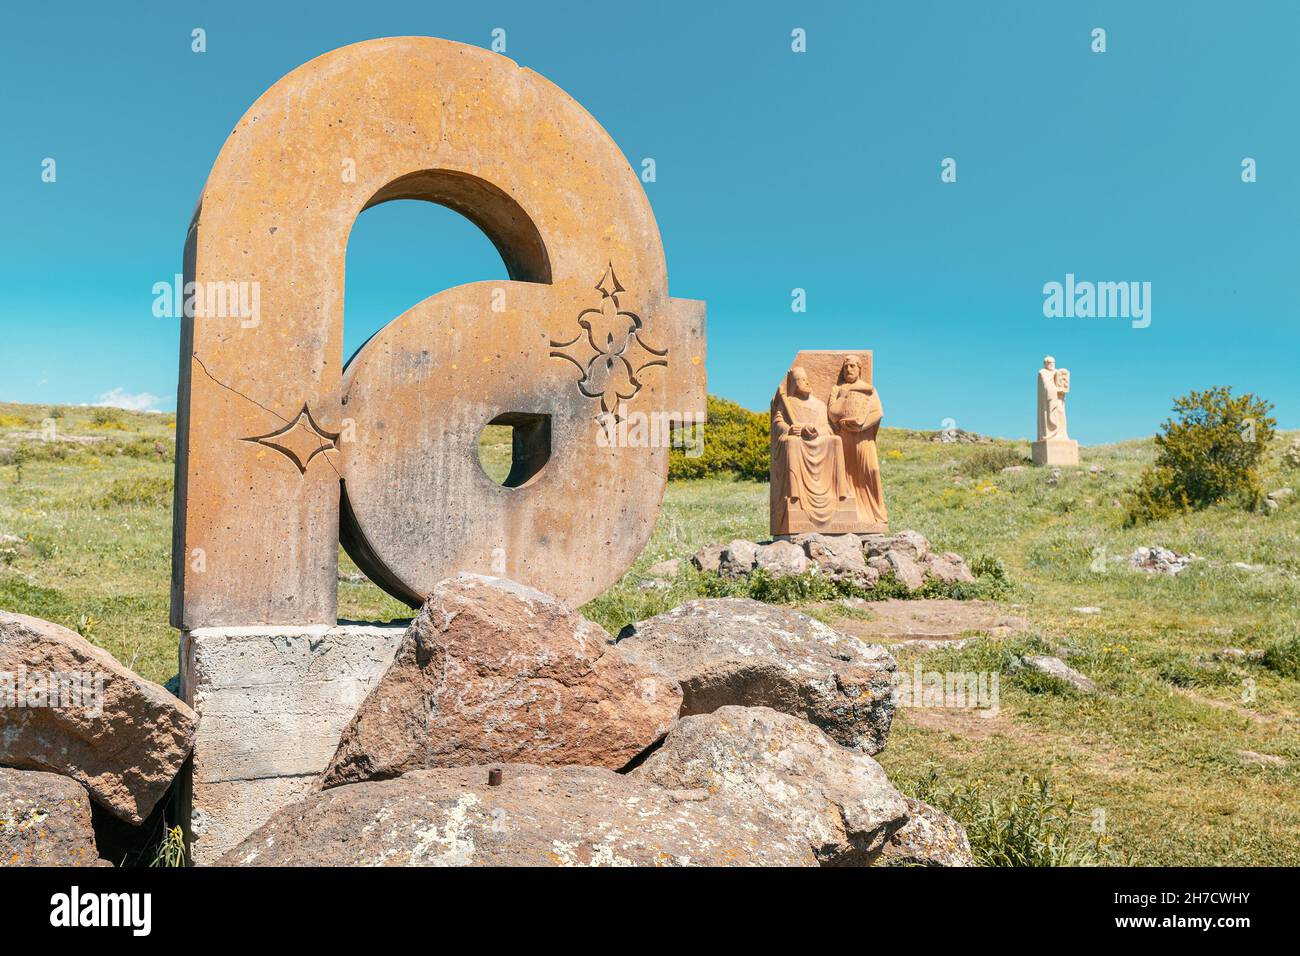 19 May 2021, Aragatsotn, Armenia: Armenian alphabet monument with stone sculptures of letters and Mesrop Mashtots Stock Photo